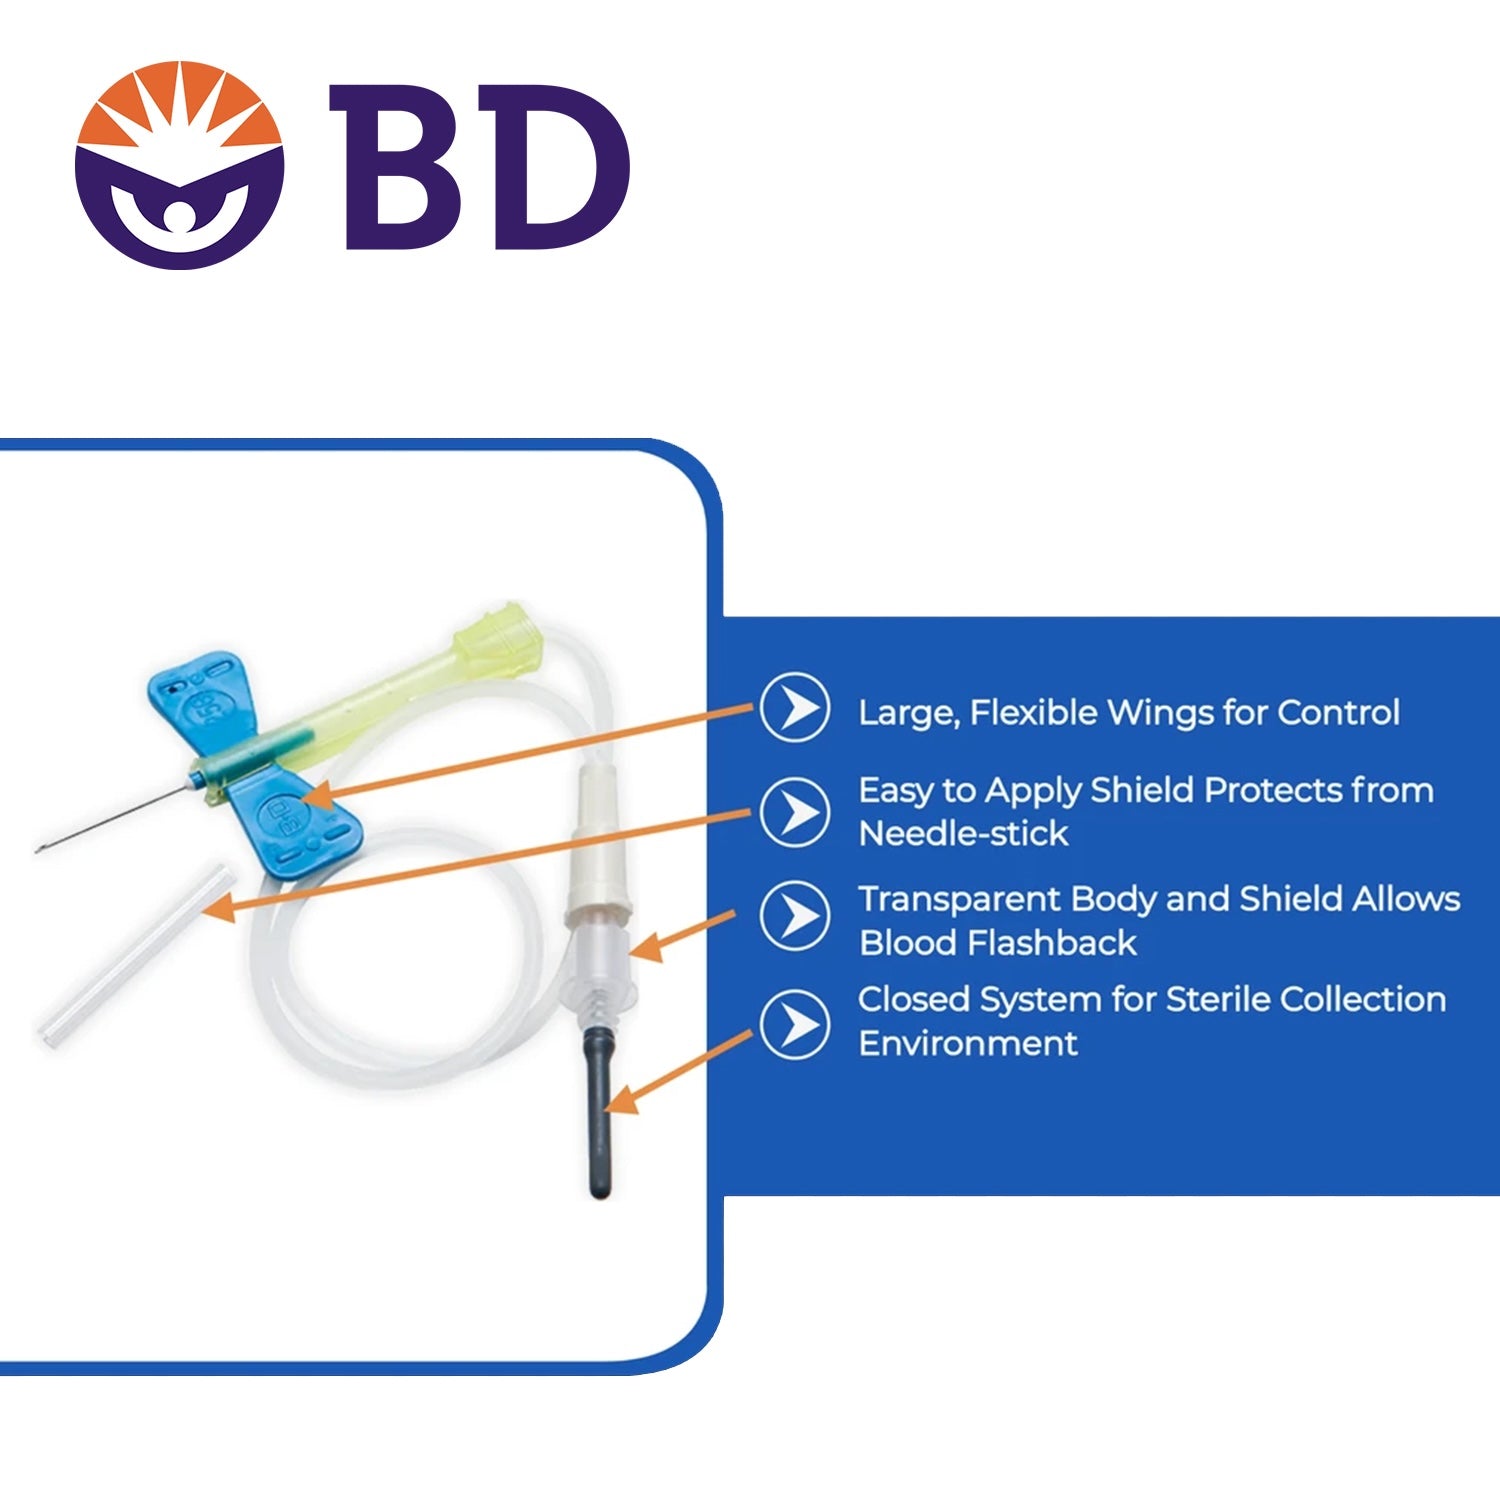 BD Vacutainer Safety Lok Blood Collection System with Pre-attached Holder | 0.75" Needle | 23G x 7" Tubing | Pack of 25 (3)